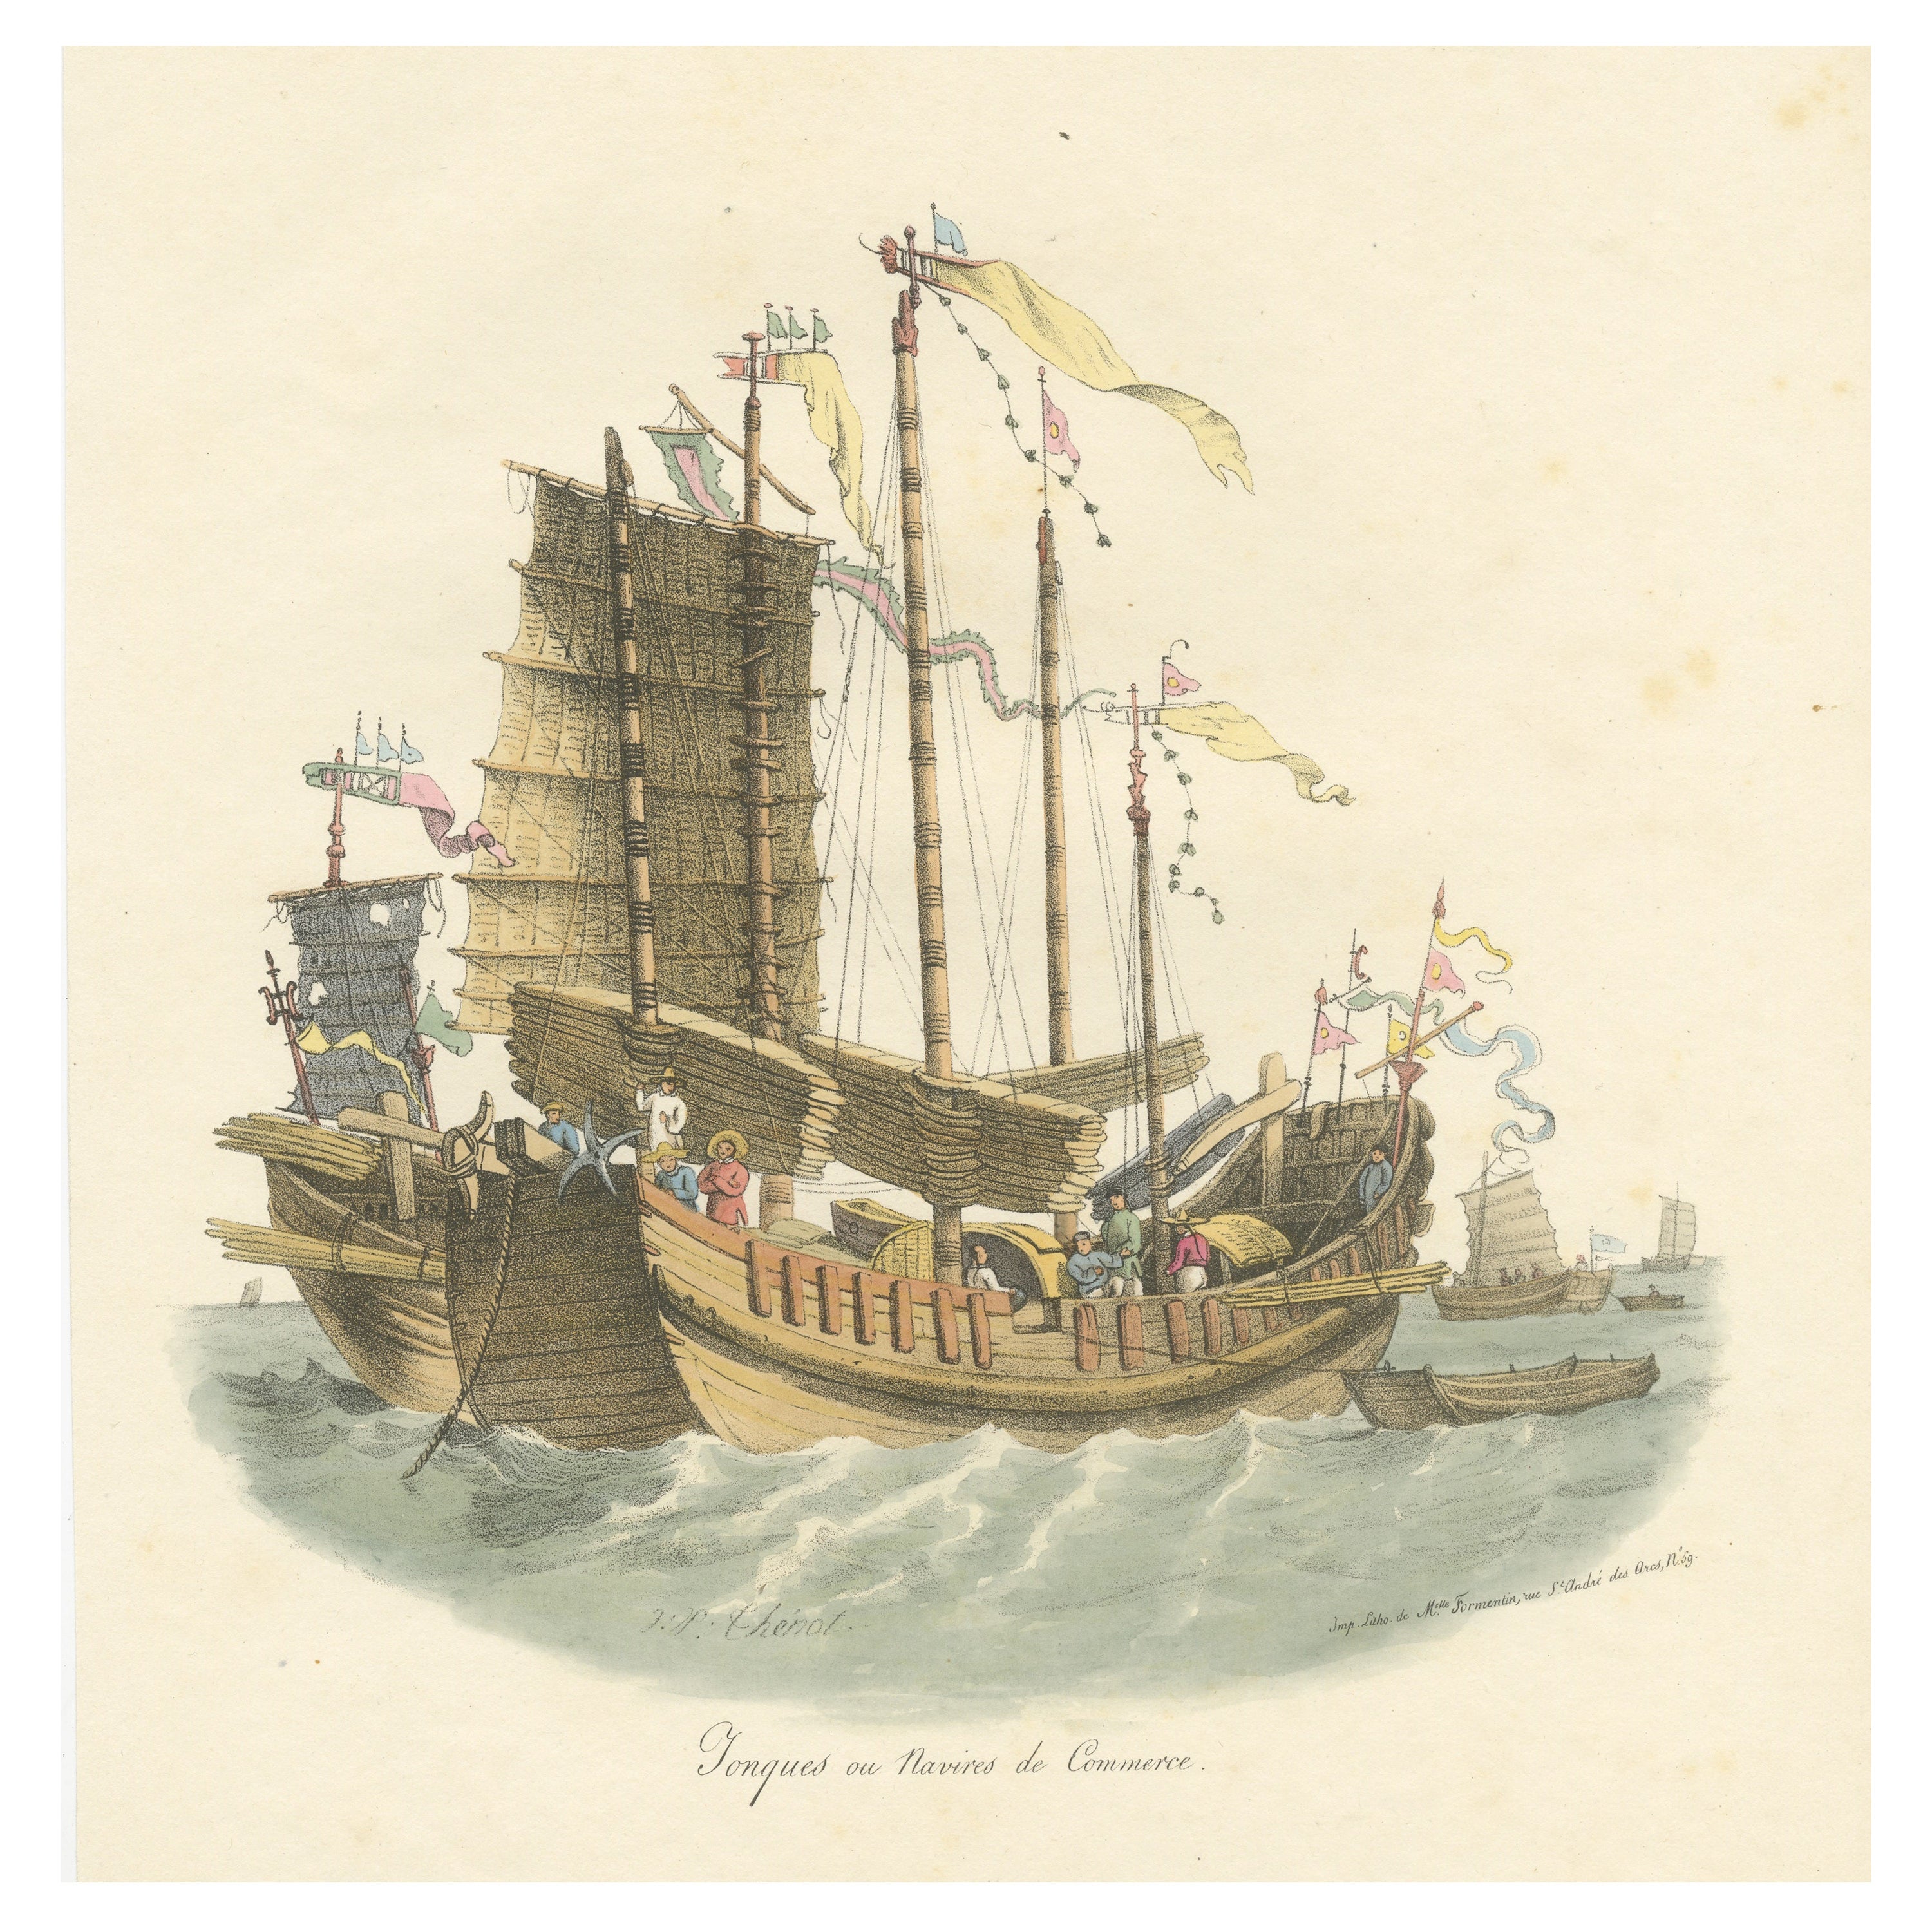 Antique Print of Chinese Junks or Merchant Ships, 1827